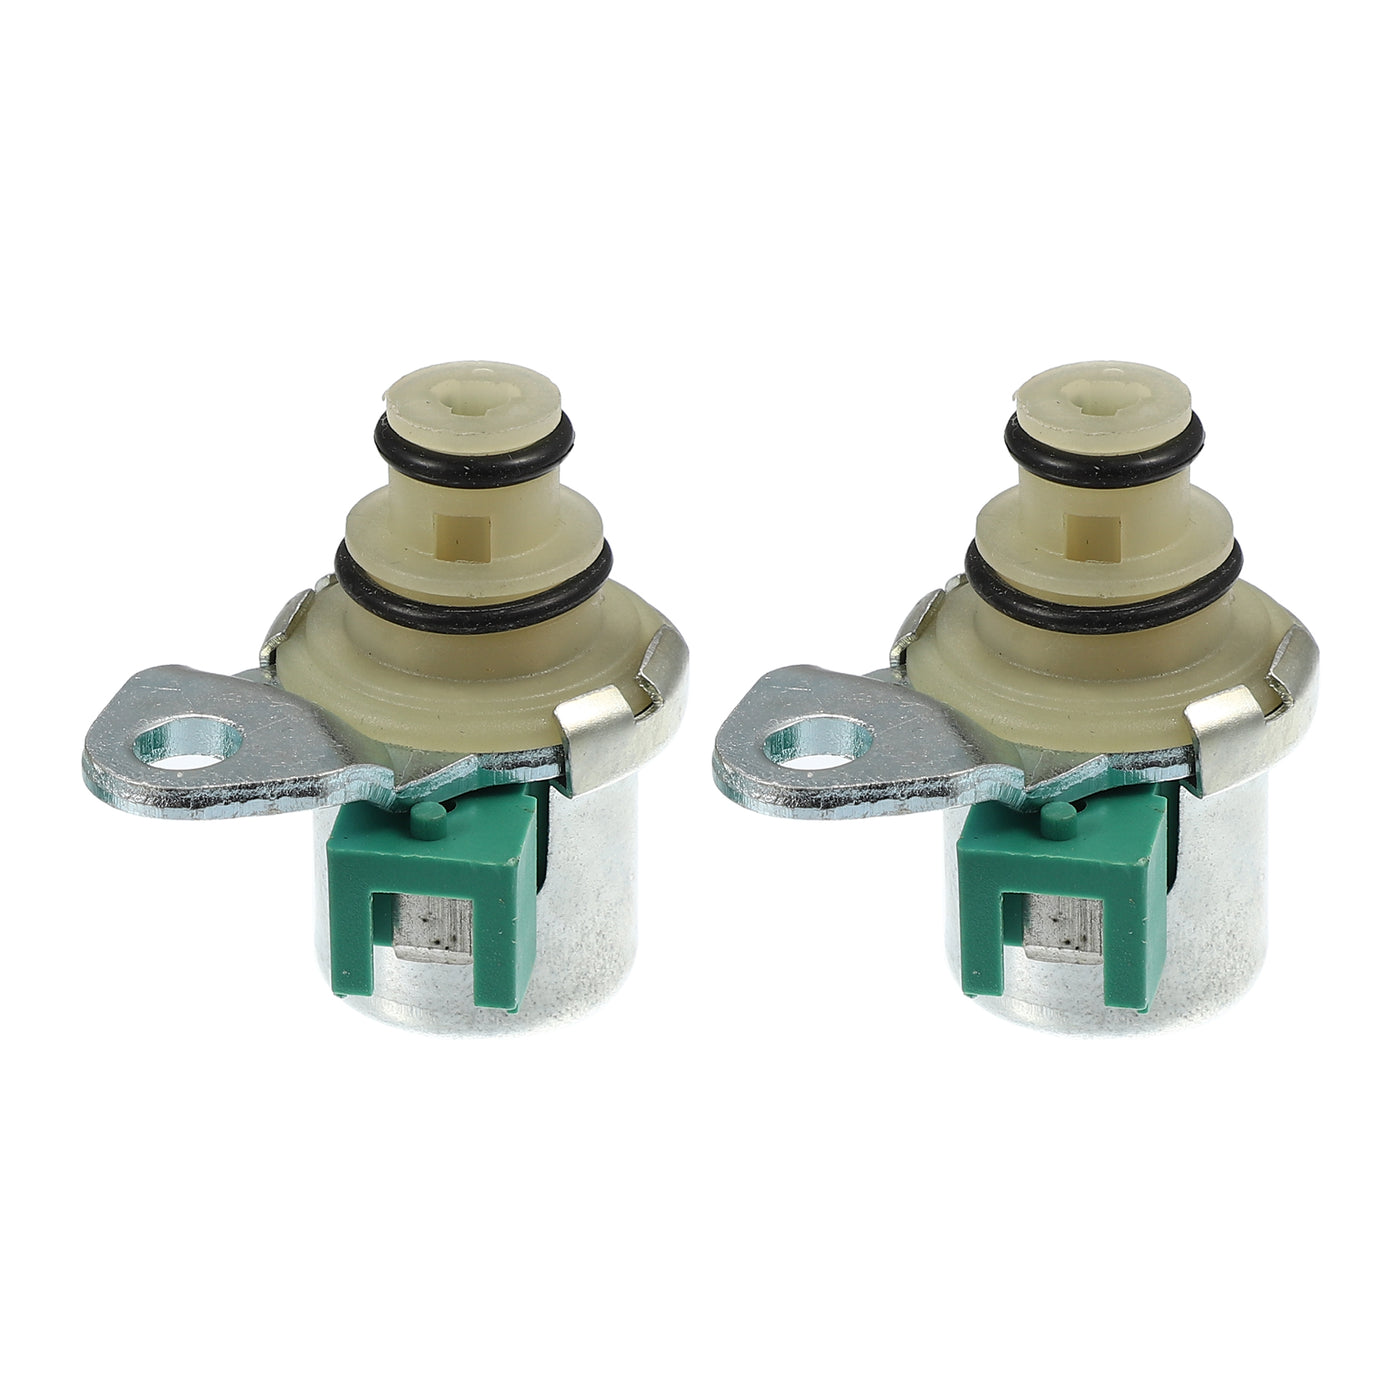 X AUTOHAUX 1 Pair Solenoid Spool Control Valve for Ford for Mazda 1999-On 4F27E FN4A-EL Model 4-Speed Transmission Variable Timing Solenoid